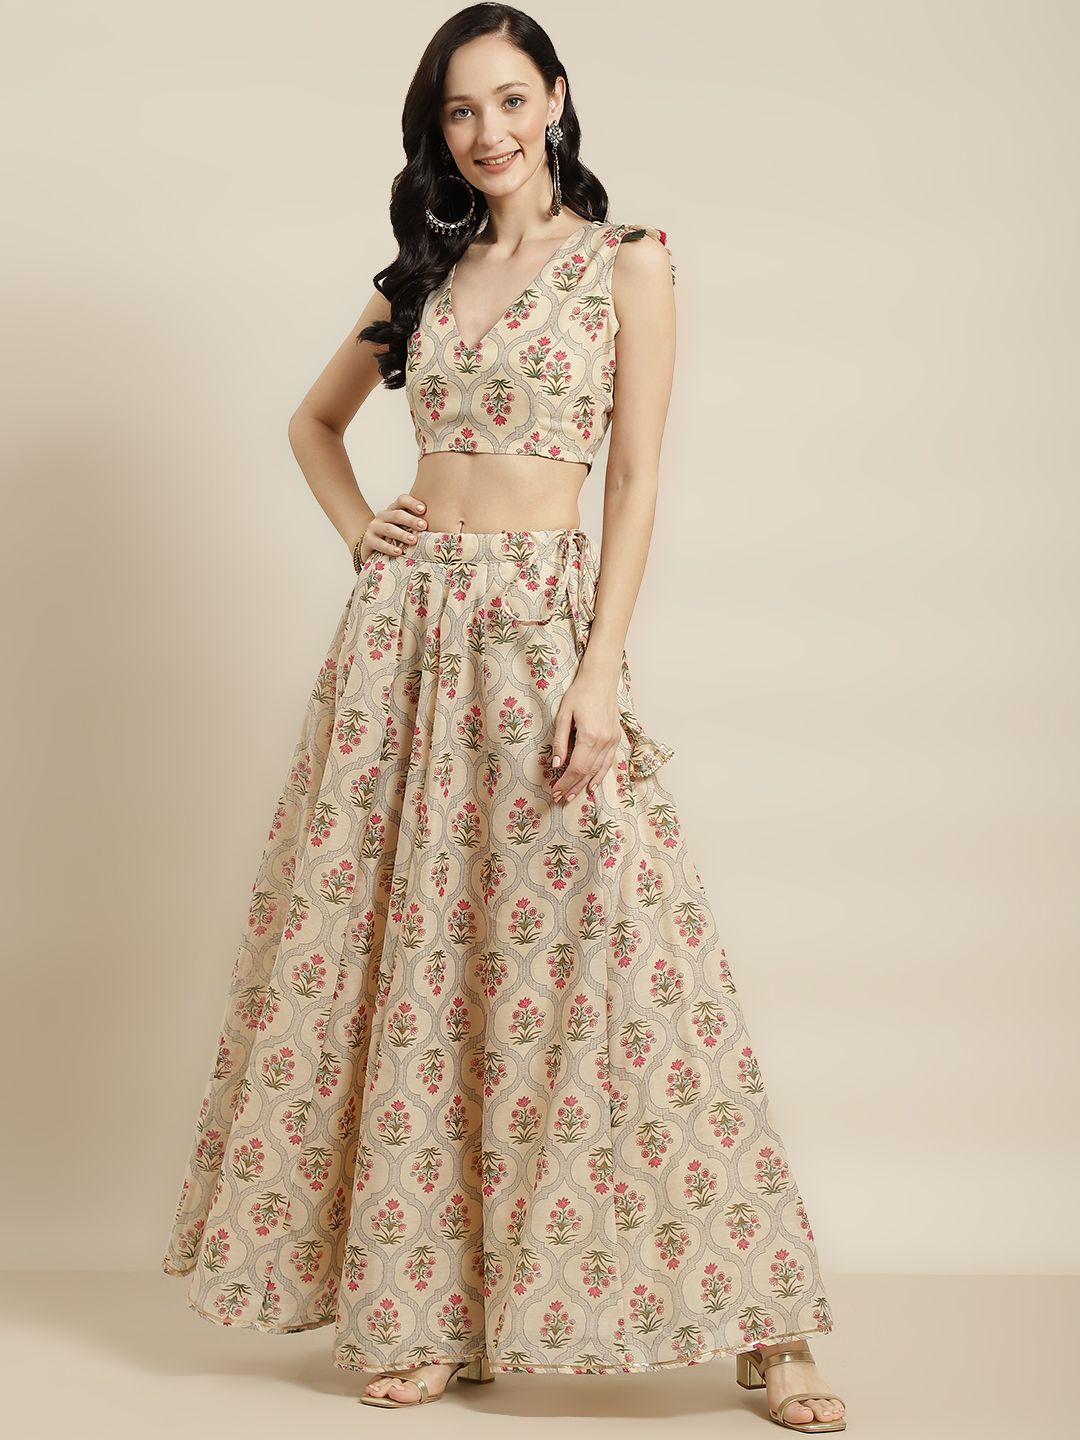 Shae by SASSAFRAS Beige & Pink Printed Ready to Wear Lehenga Price in India